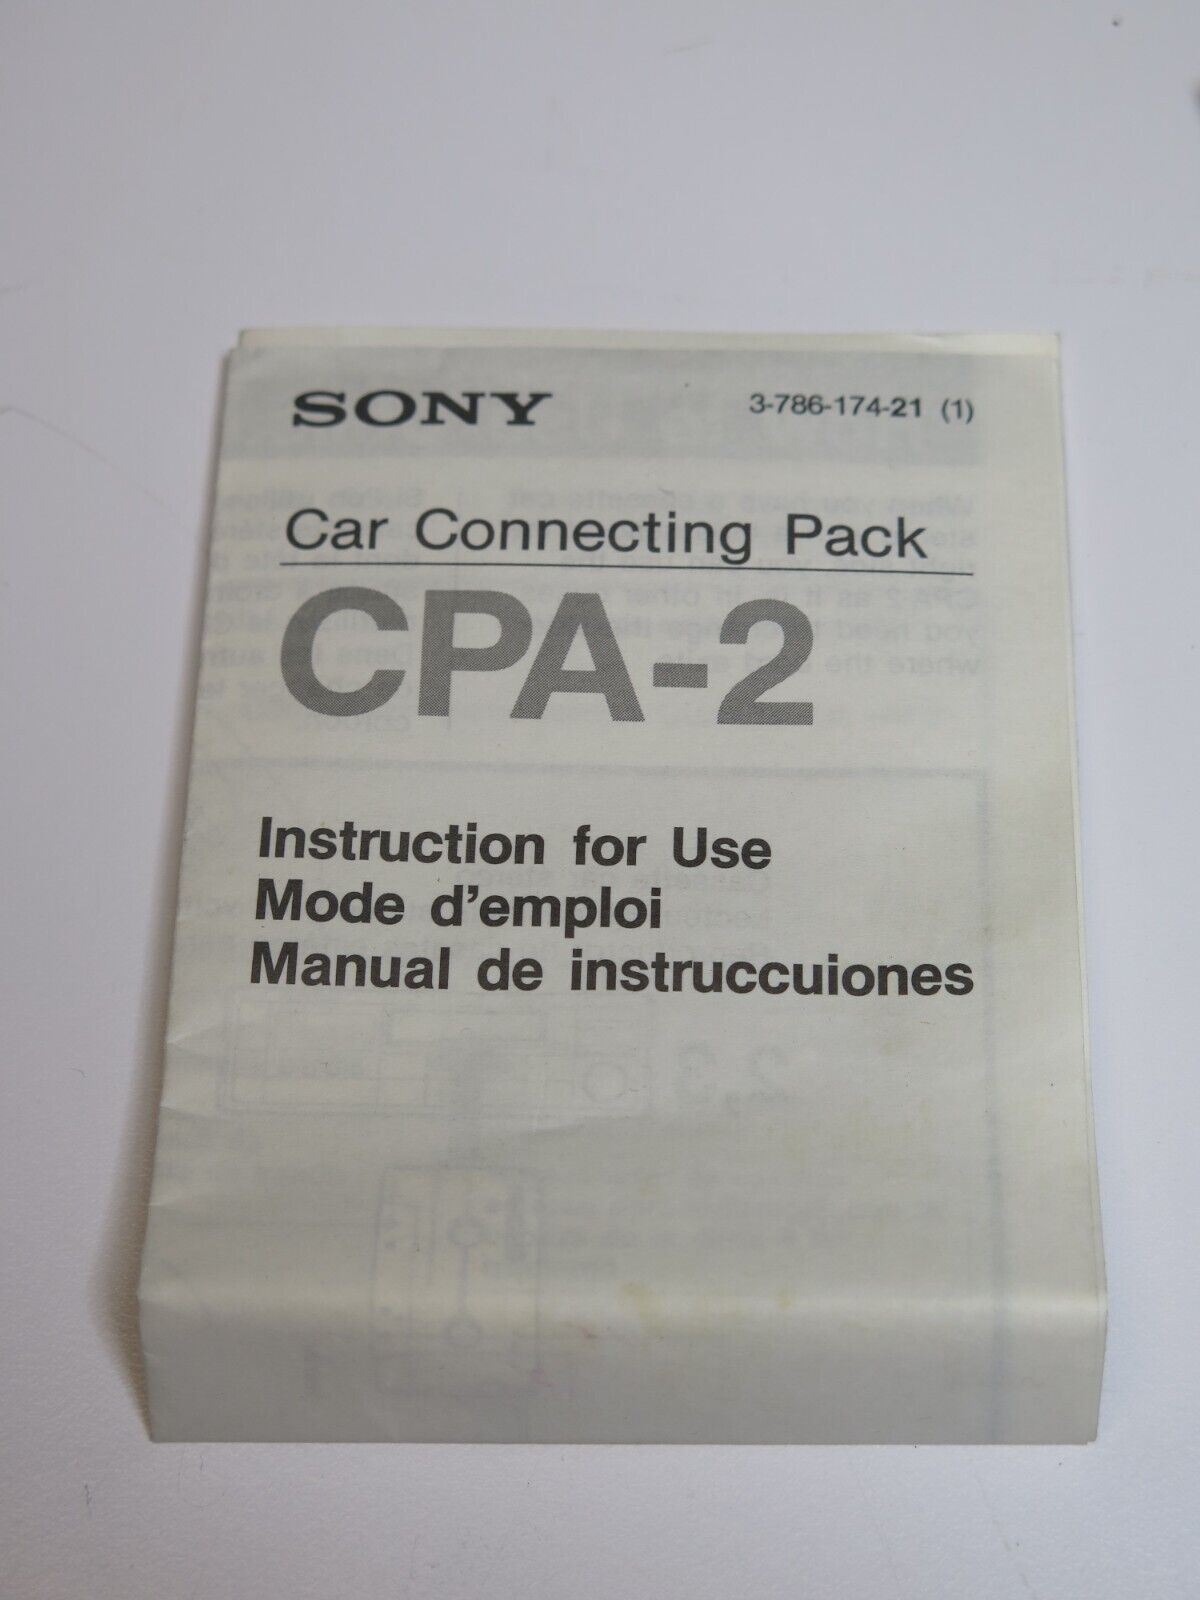 Sony CPA-2 Car Connecting Pack Cassette Tape Adapter ** BOX/INSTRUCTIONS ONLY **